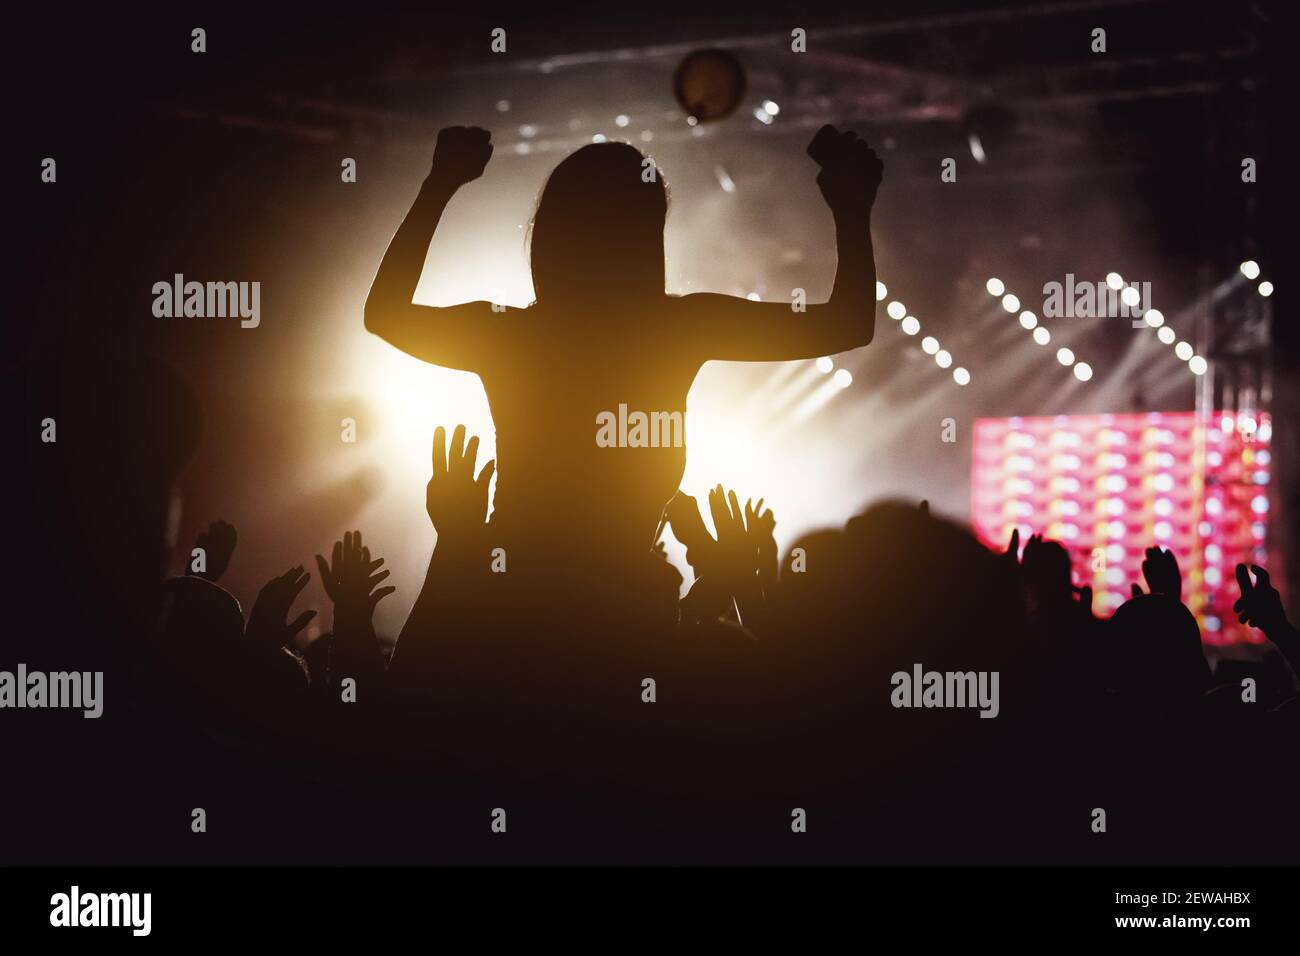 Girl silhouette on a big concert show Stock Photo